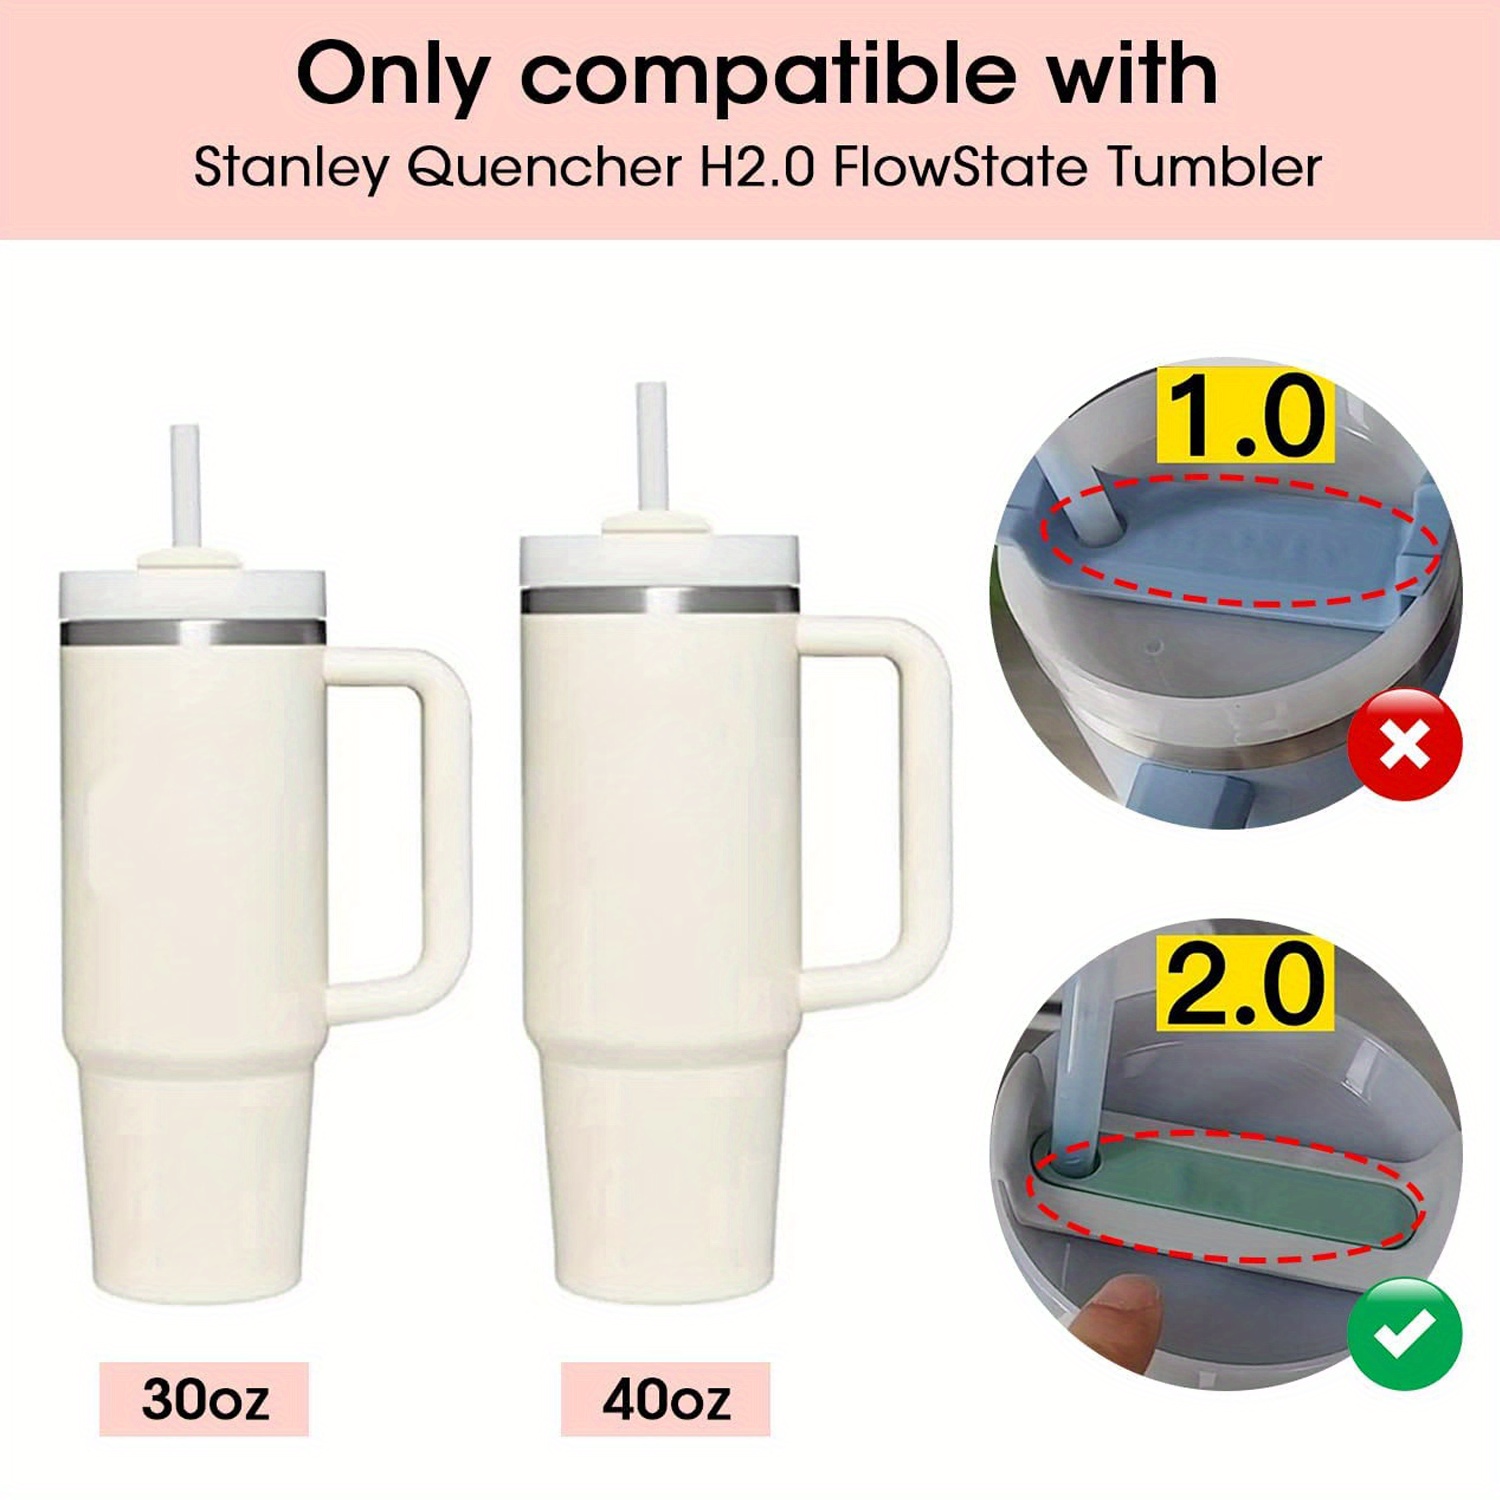 KissDate Tumbler Lids 2 Pack Fit for Stanley Tumbler 30 oz, Spill Proof and  Splash Resistant Lids for Stanley Tumbler Cup 30oz an